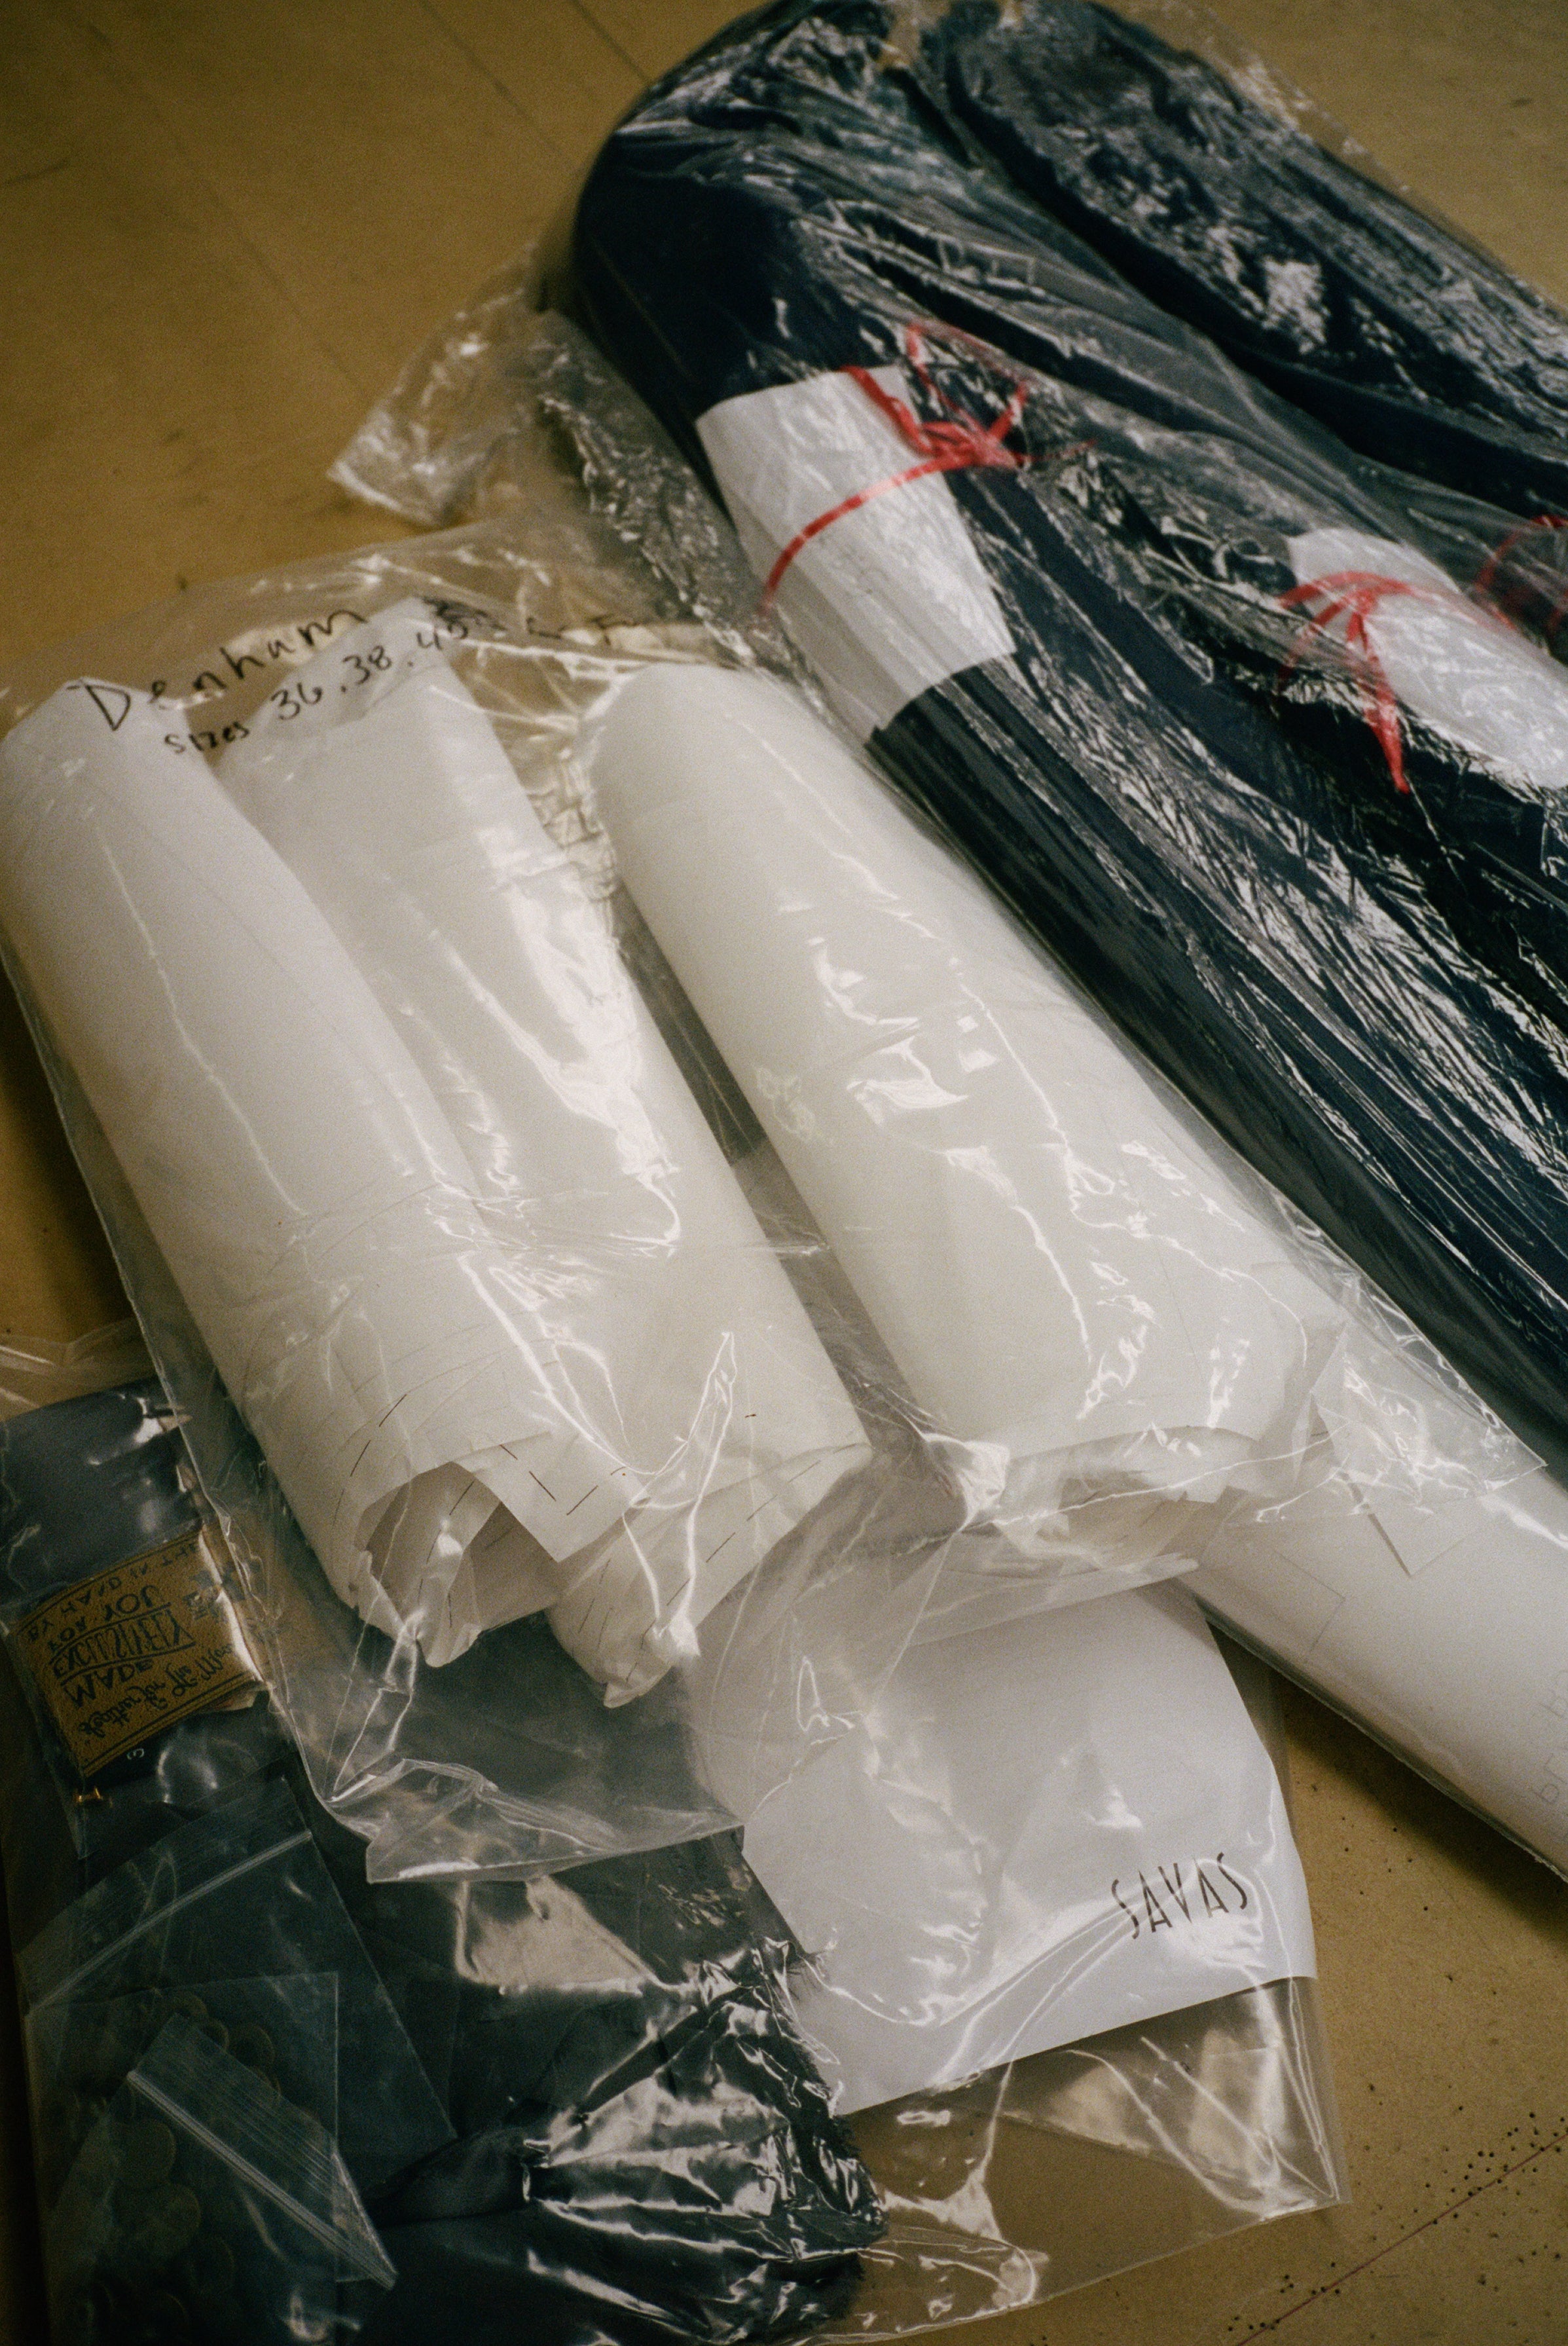 Image of polyester bags full of jacket hardware.